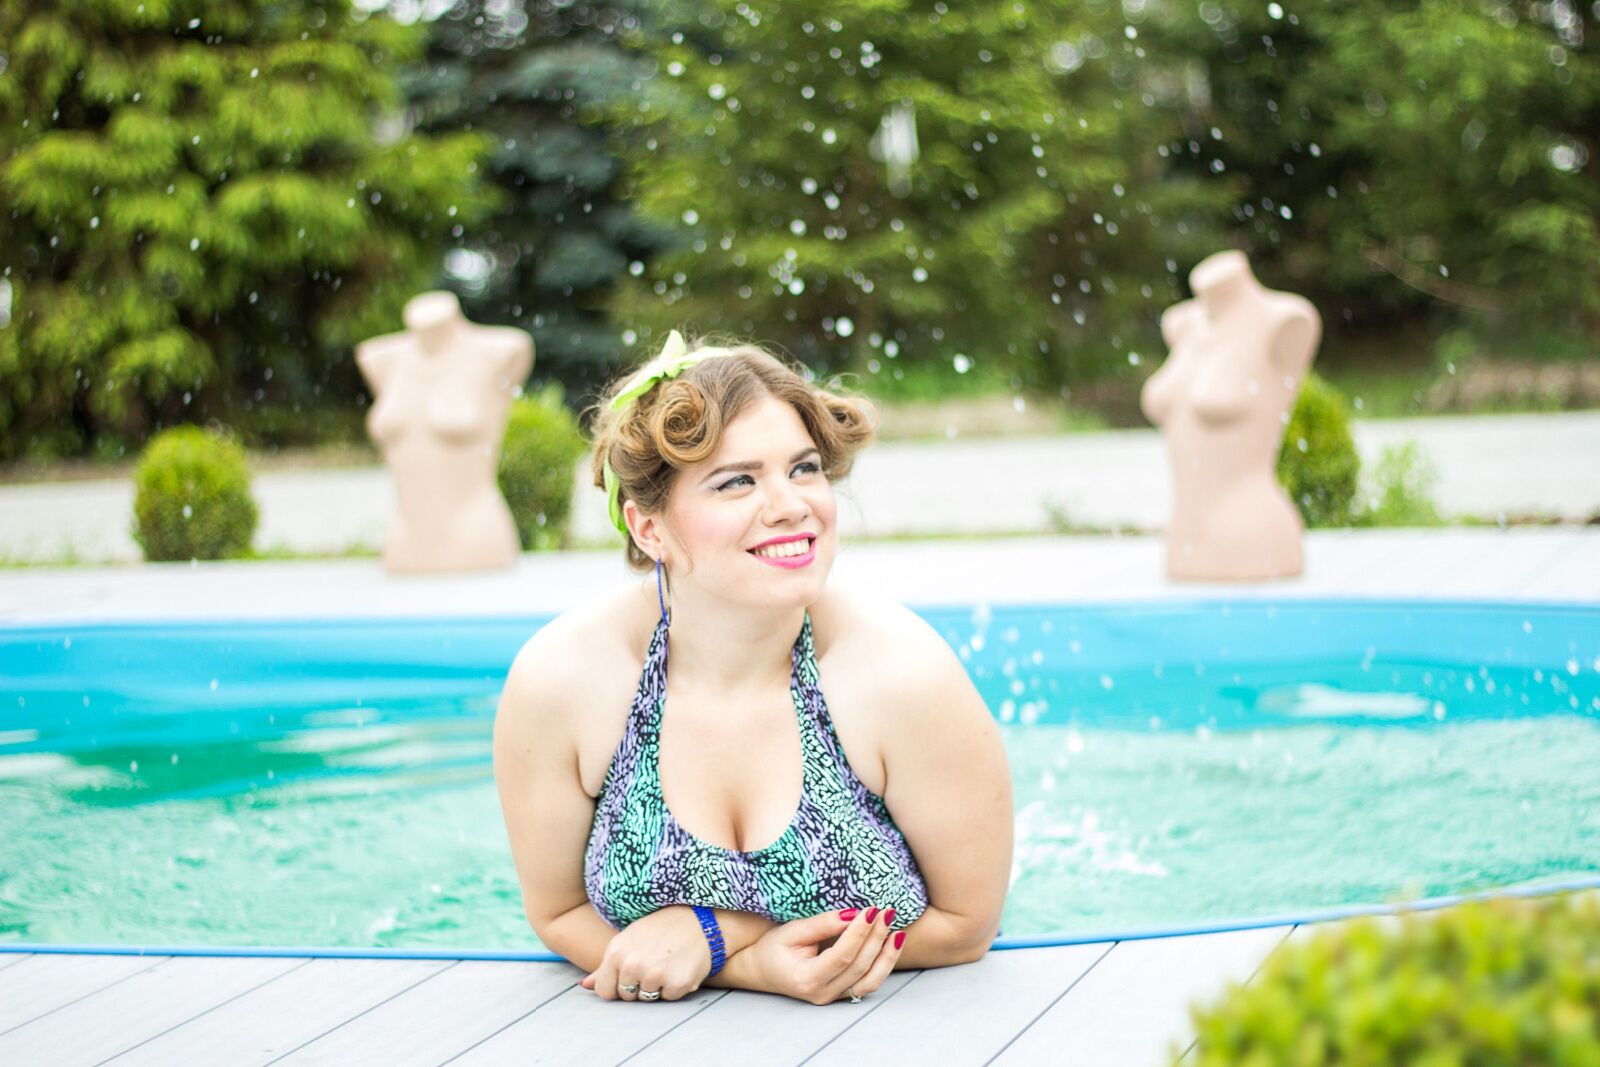 Plus-size spa woman at an outdoor pool looking super happy